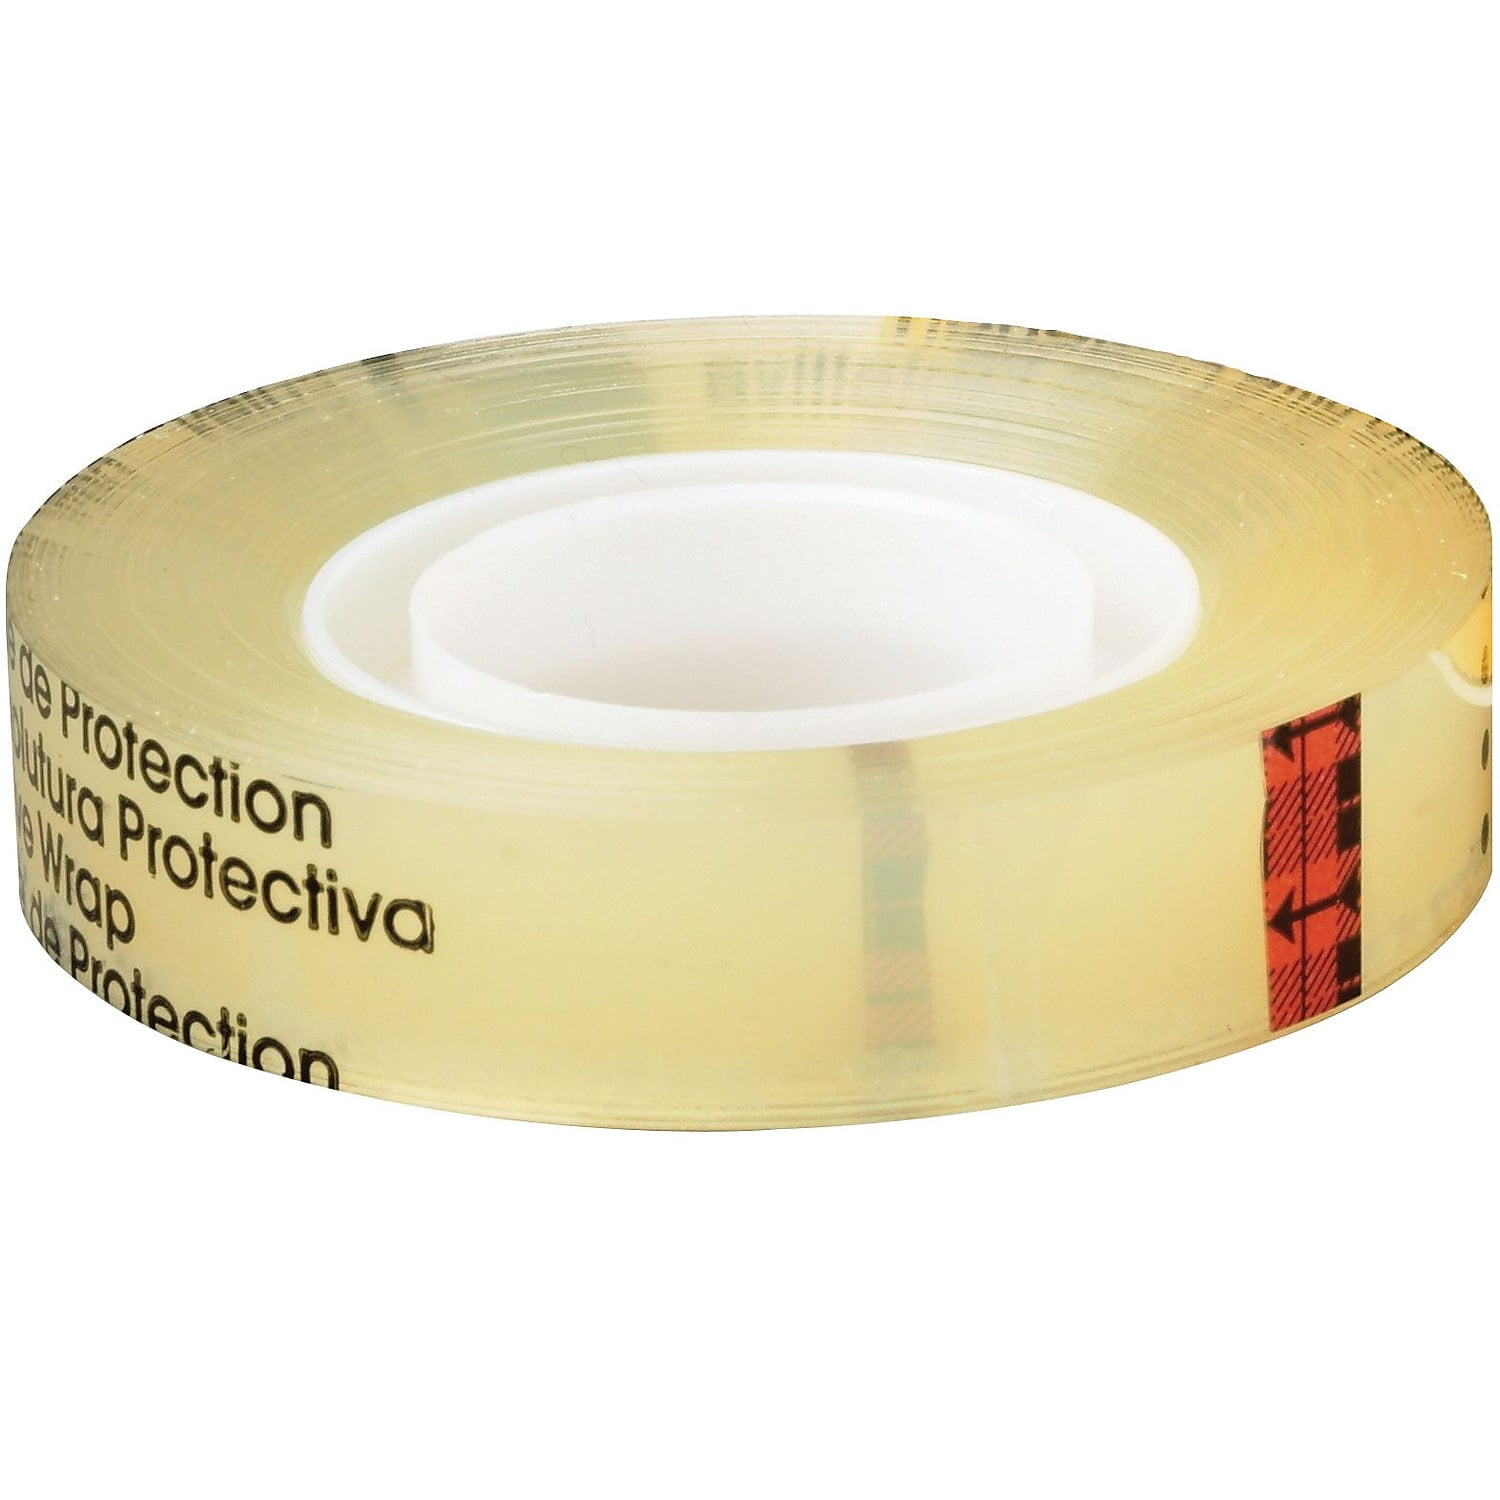 Double Sided Tape Refill Rolls, 6 Count with Desktop Dispenser -  MMM6656PKC40, 3M Company